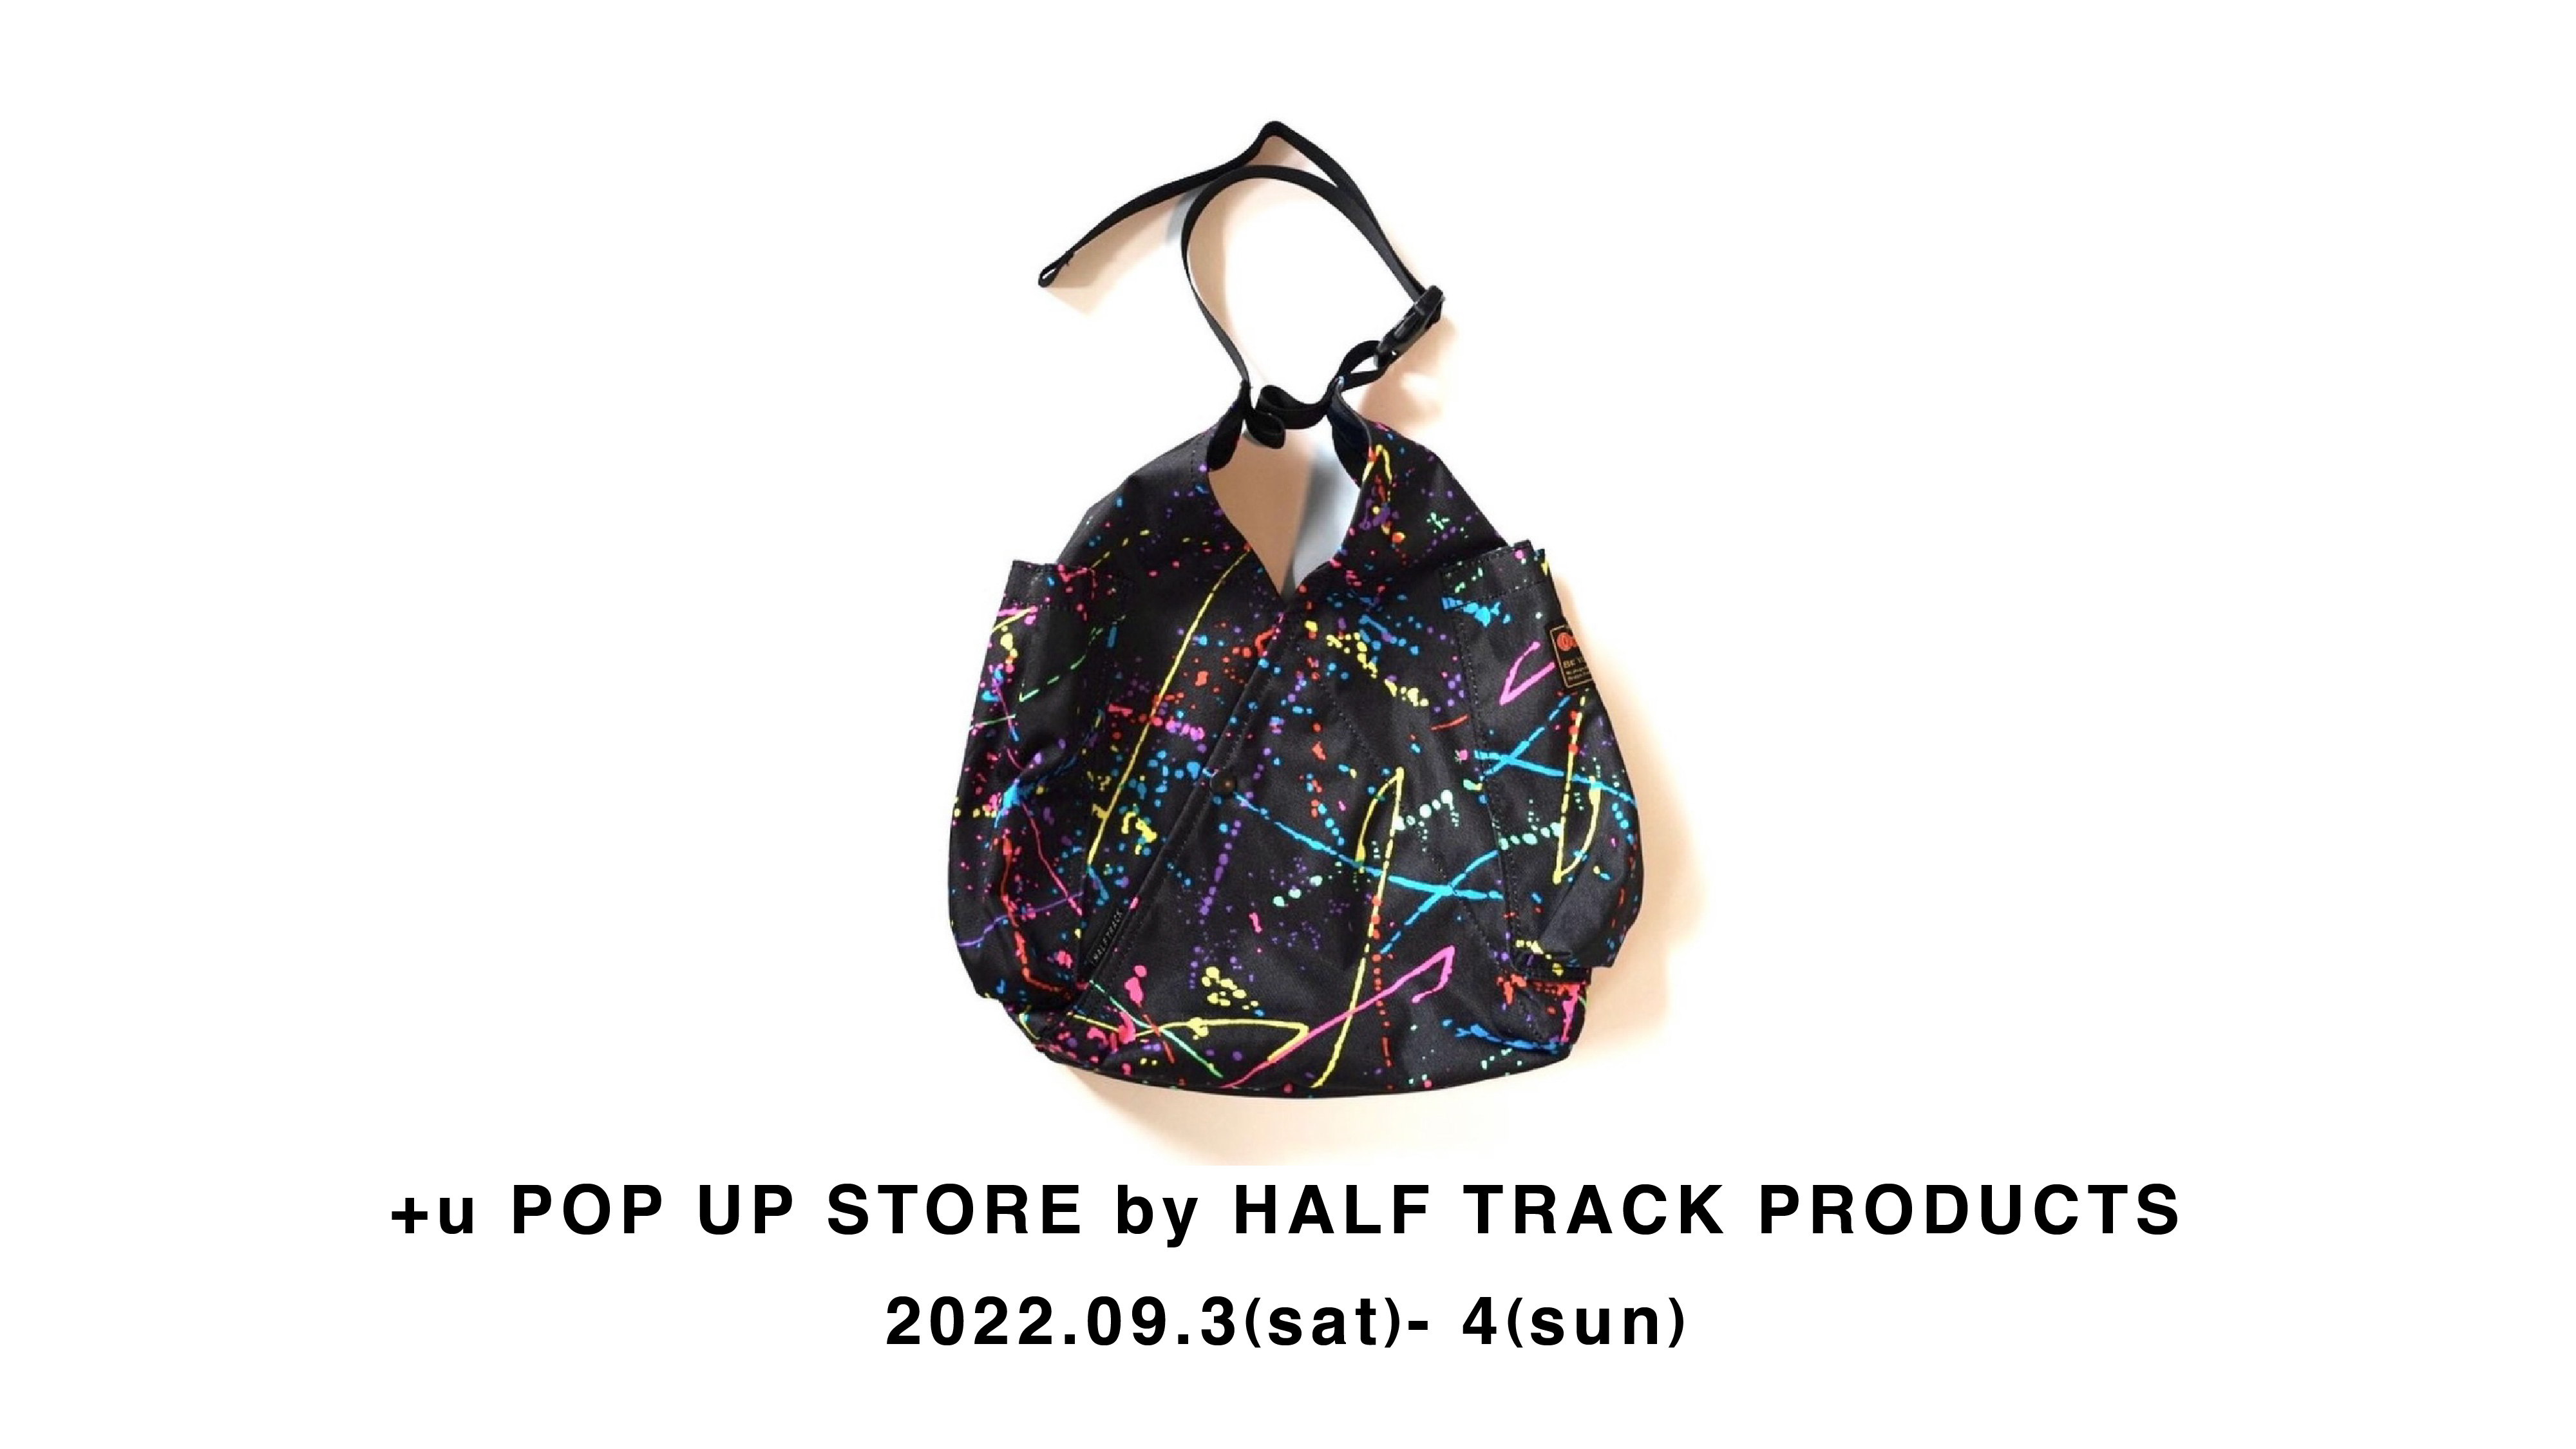 9/3-4 +u POP UP STORE by HALF TRACK PRODUCTS